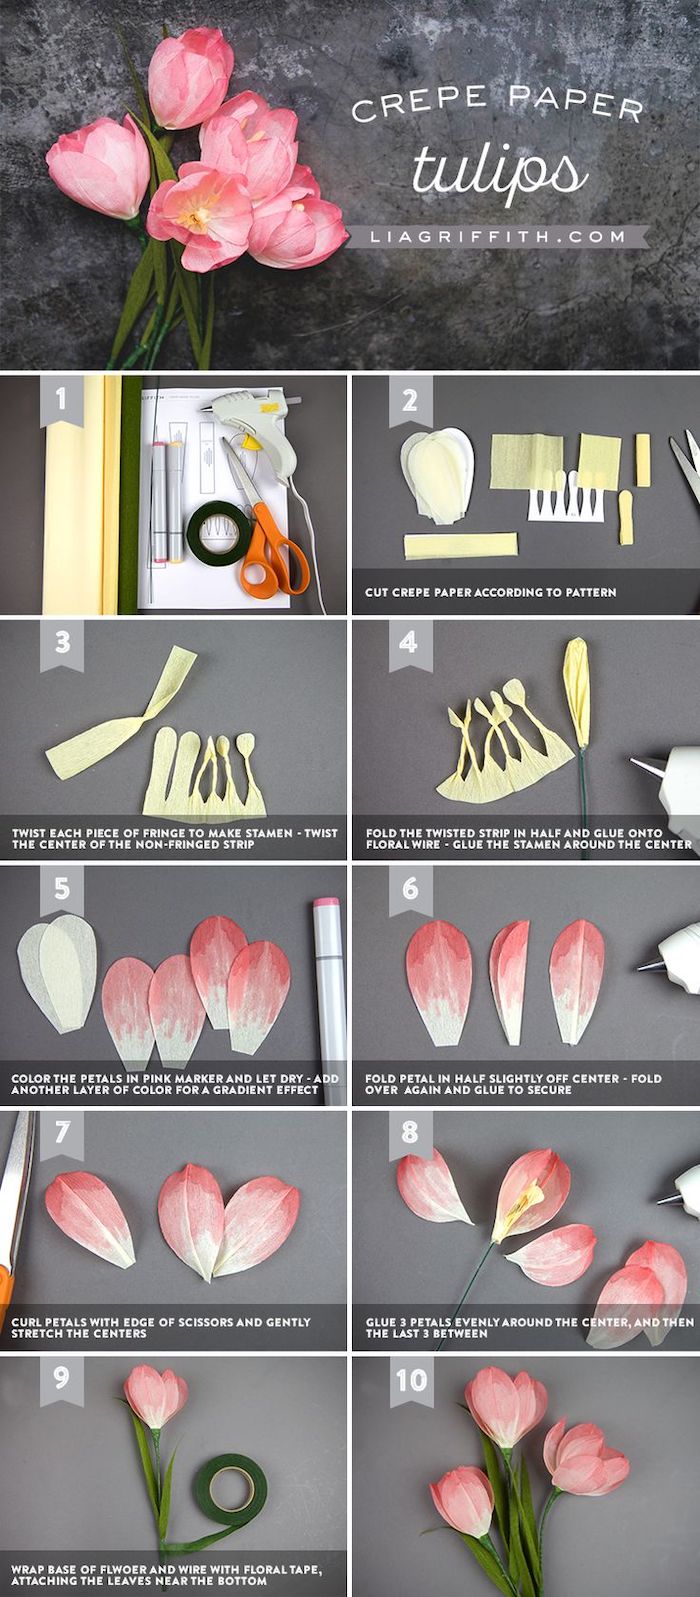 how to make tulips out of crepe paper, photo collage of step by step diy tutorial, how to make paper flowers easy